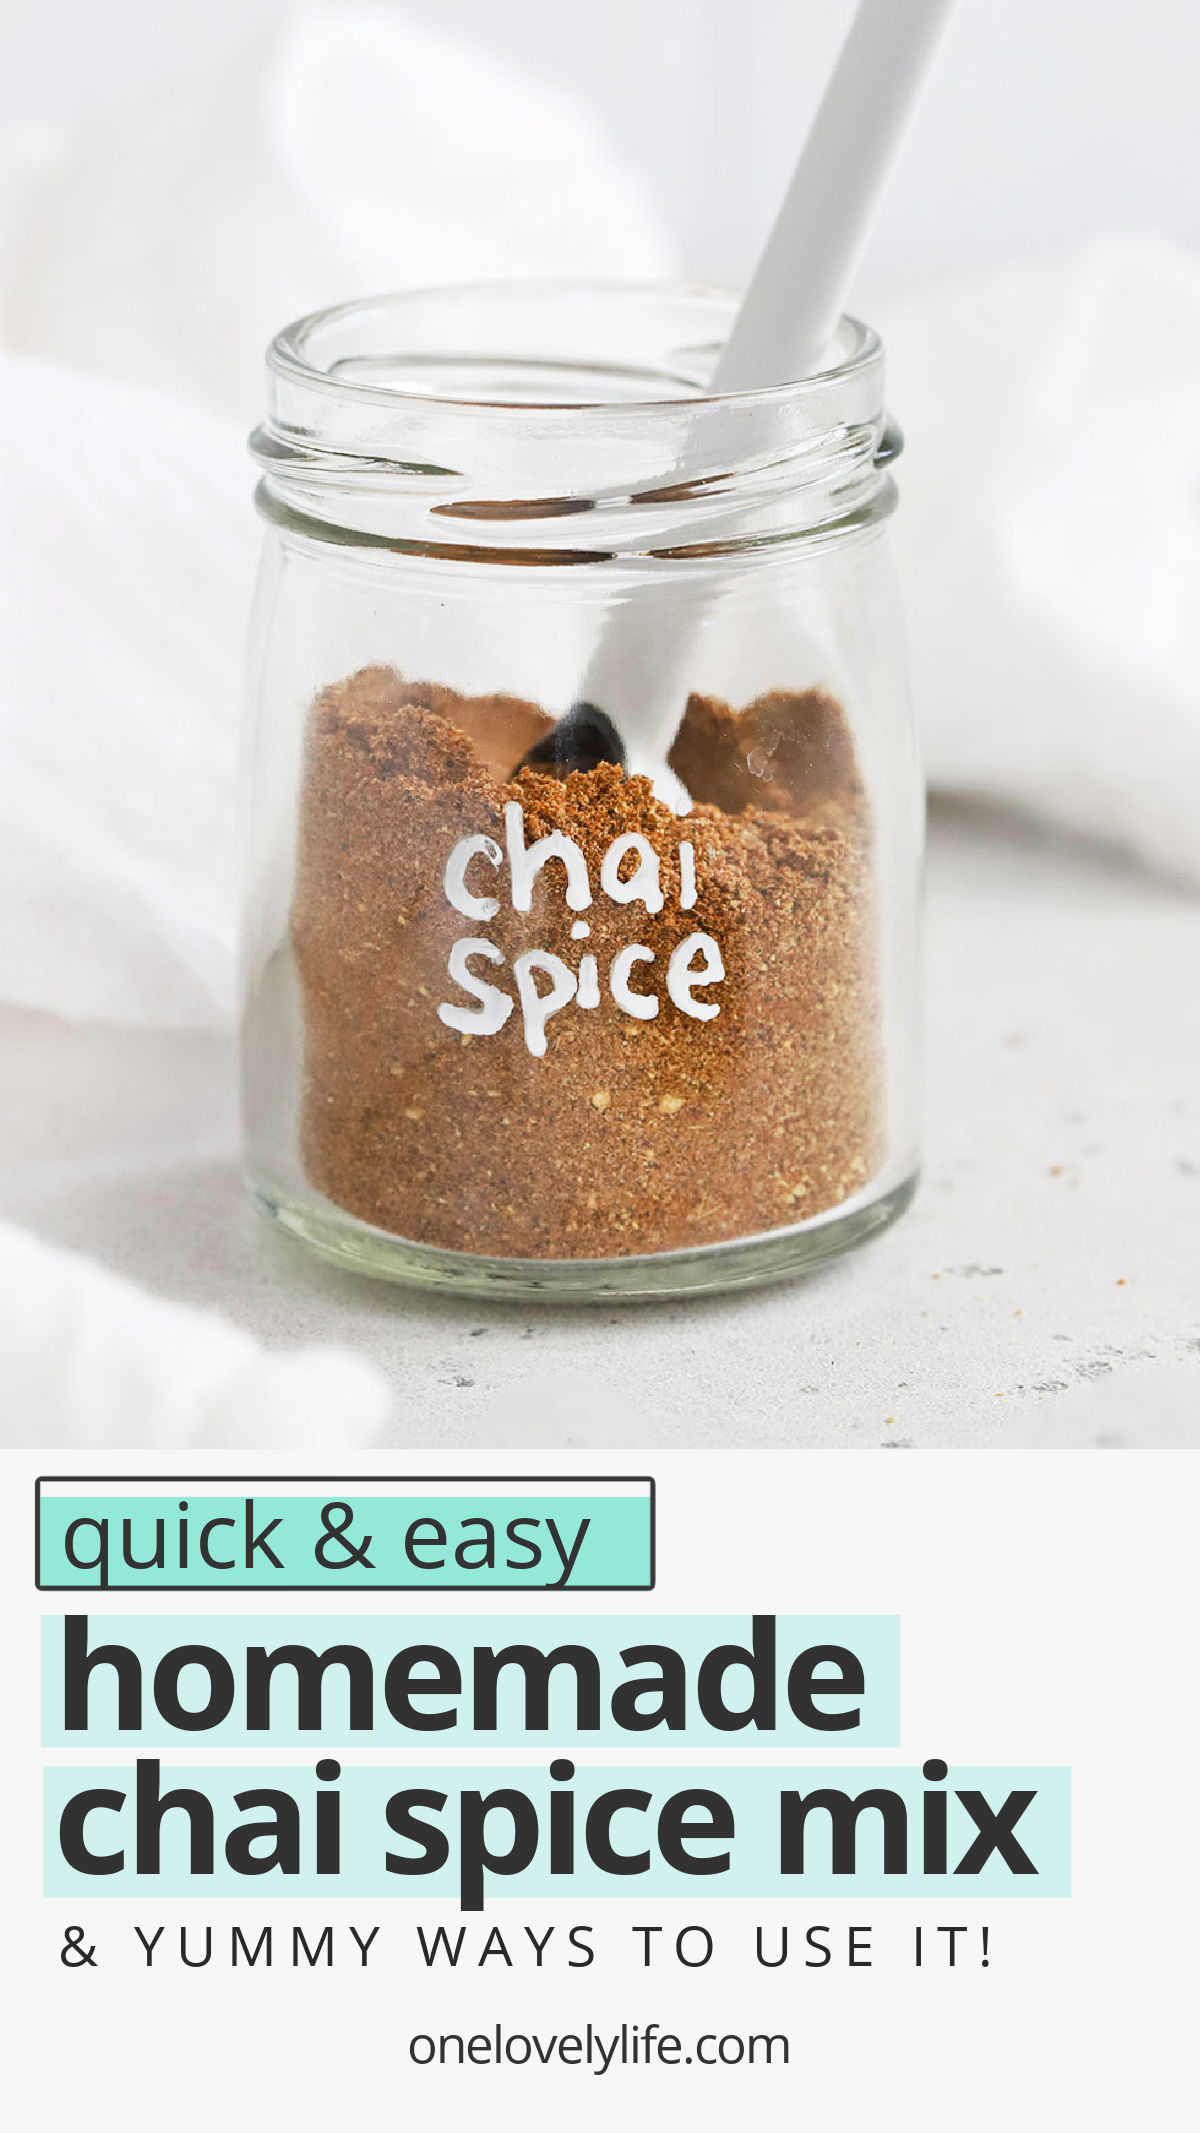 Chai Spice Mix - Learn how to make chai spice mix with our easy recipe! Add it to drinks, baked goods, and so much more. Don't miss all our favorite ways to use it in the post! (Naturally vegan, paleo, Whole30) // DIY Chai Spice // Homemade Chai Mix // Homemade Spice Blend // Chai Spice From Scratch// #chaispice #chai #fromscratch